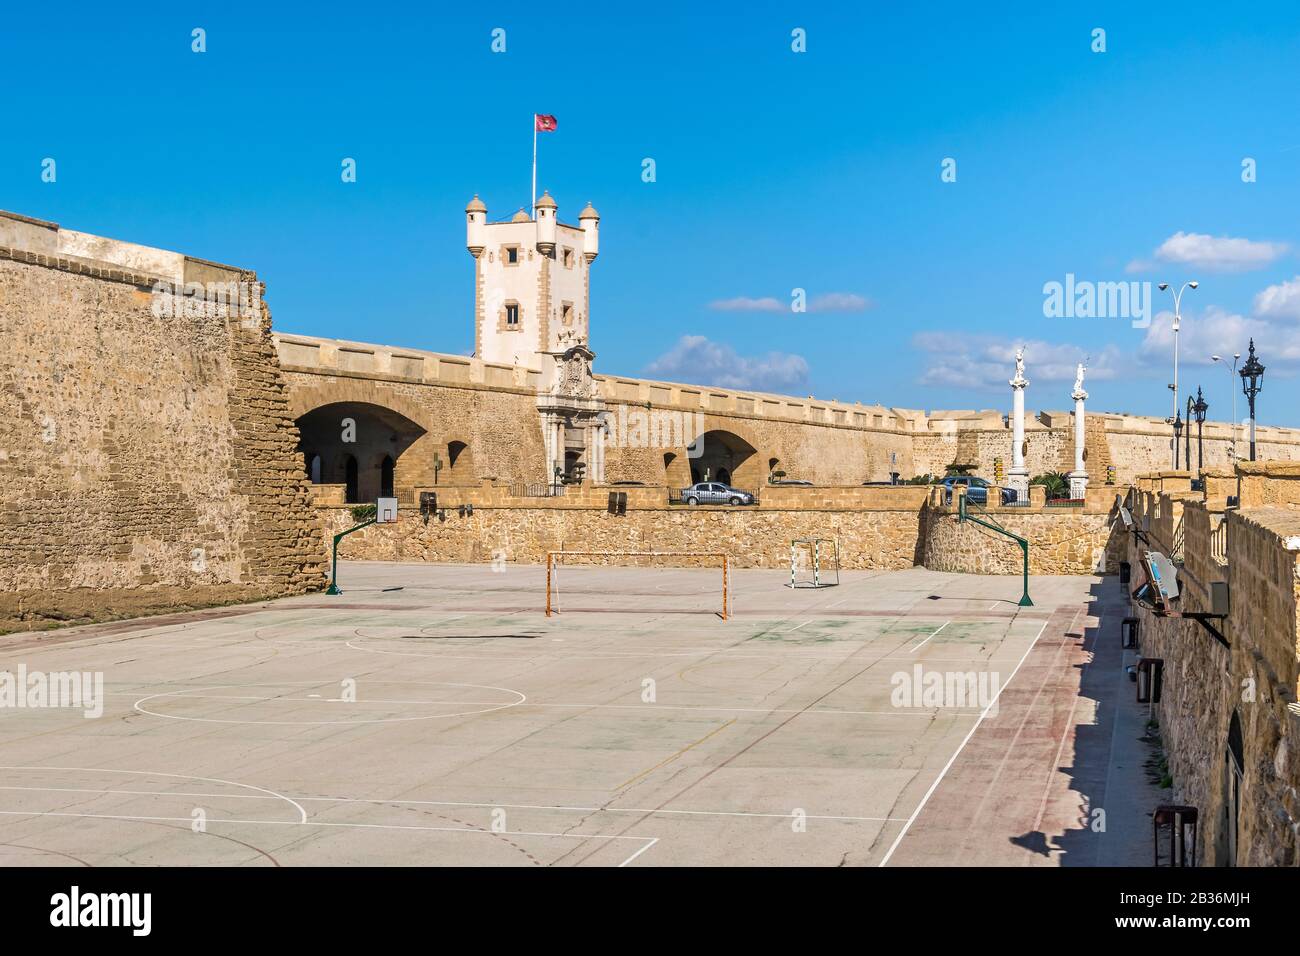 Plaza de la Constitucion with Puertas de Tierra, a bastion-monument built around remnants of the old defensive wall with the purple flag of its canton Stock Photo